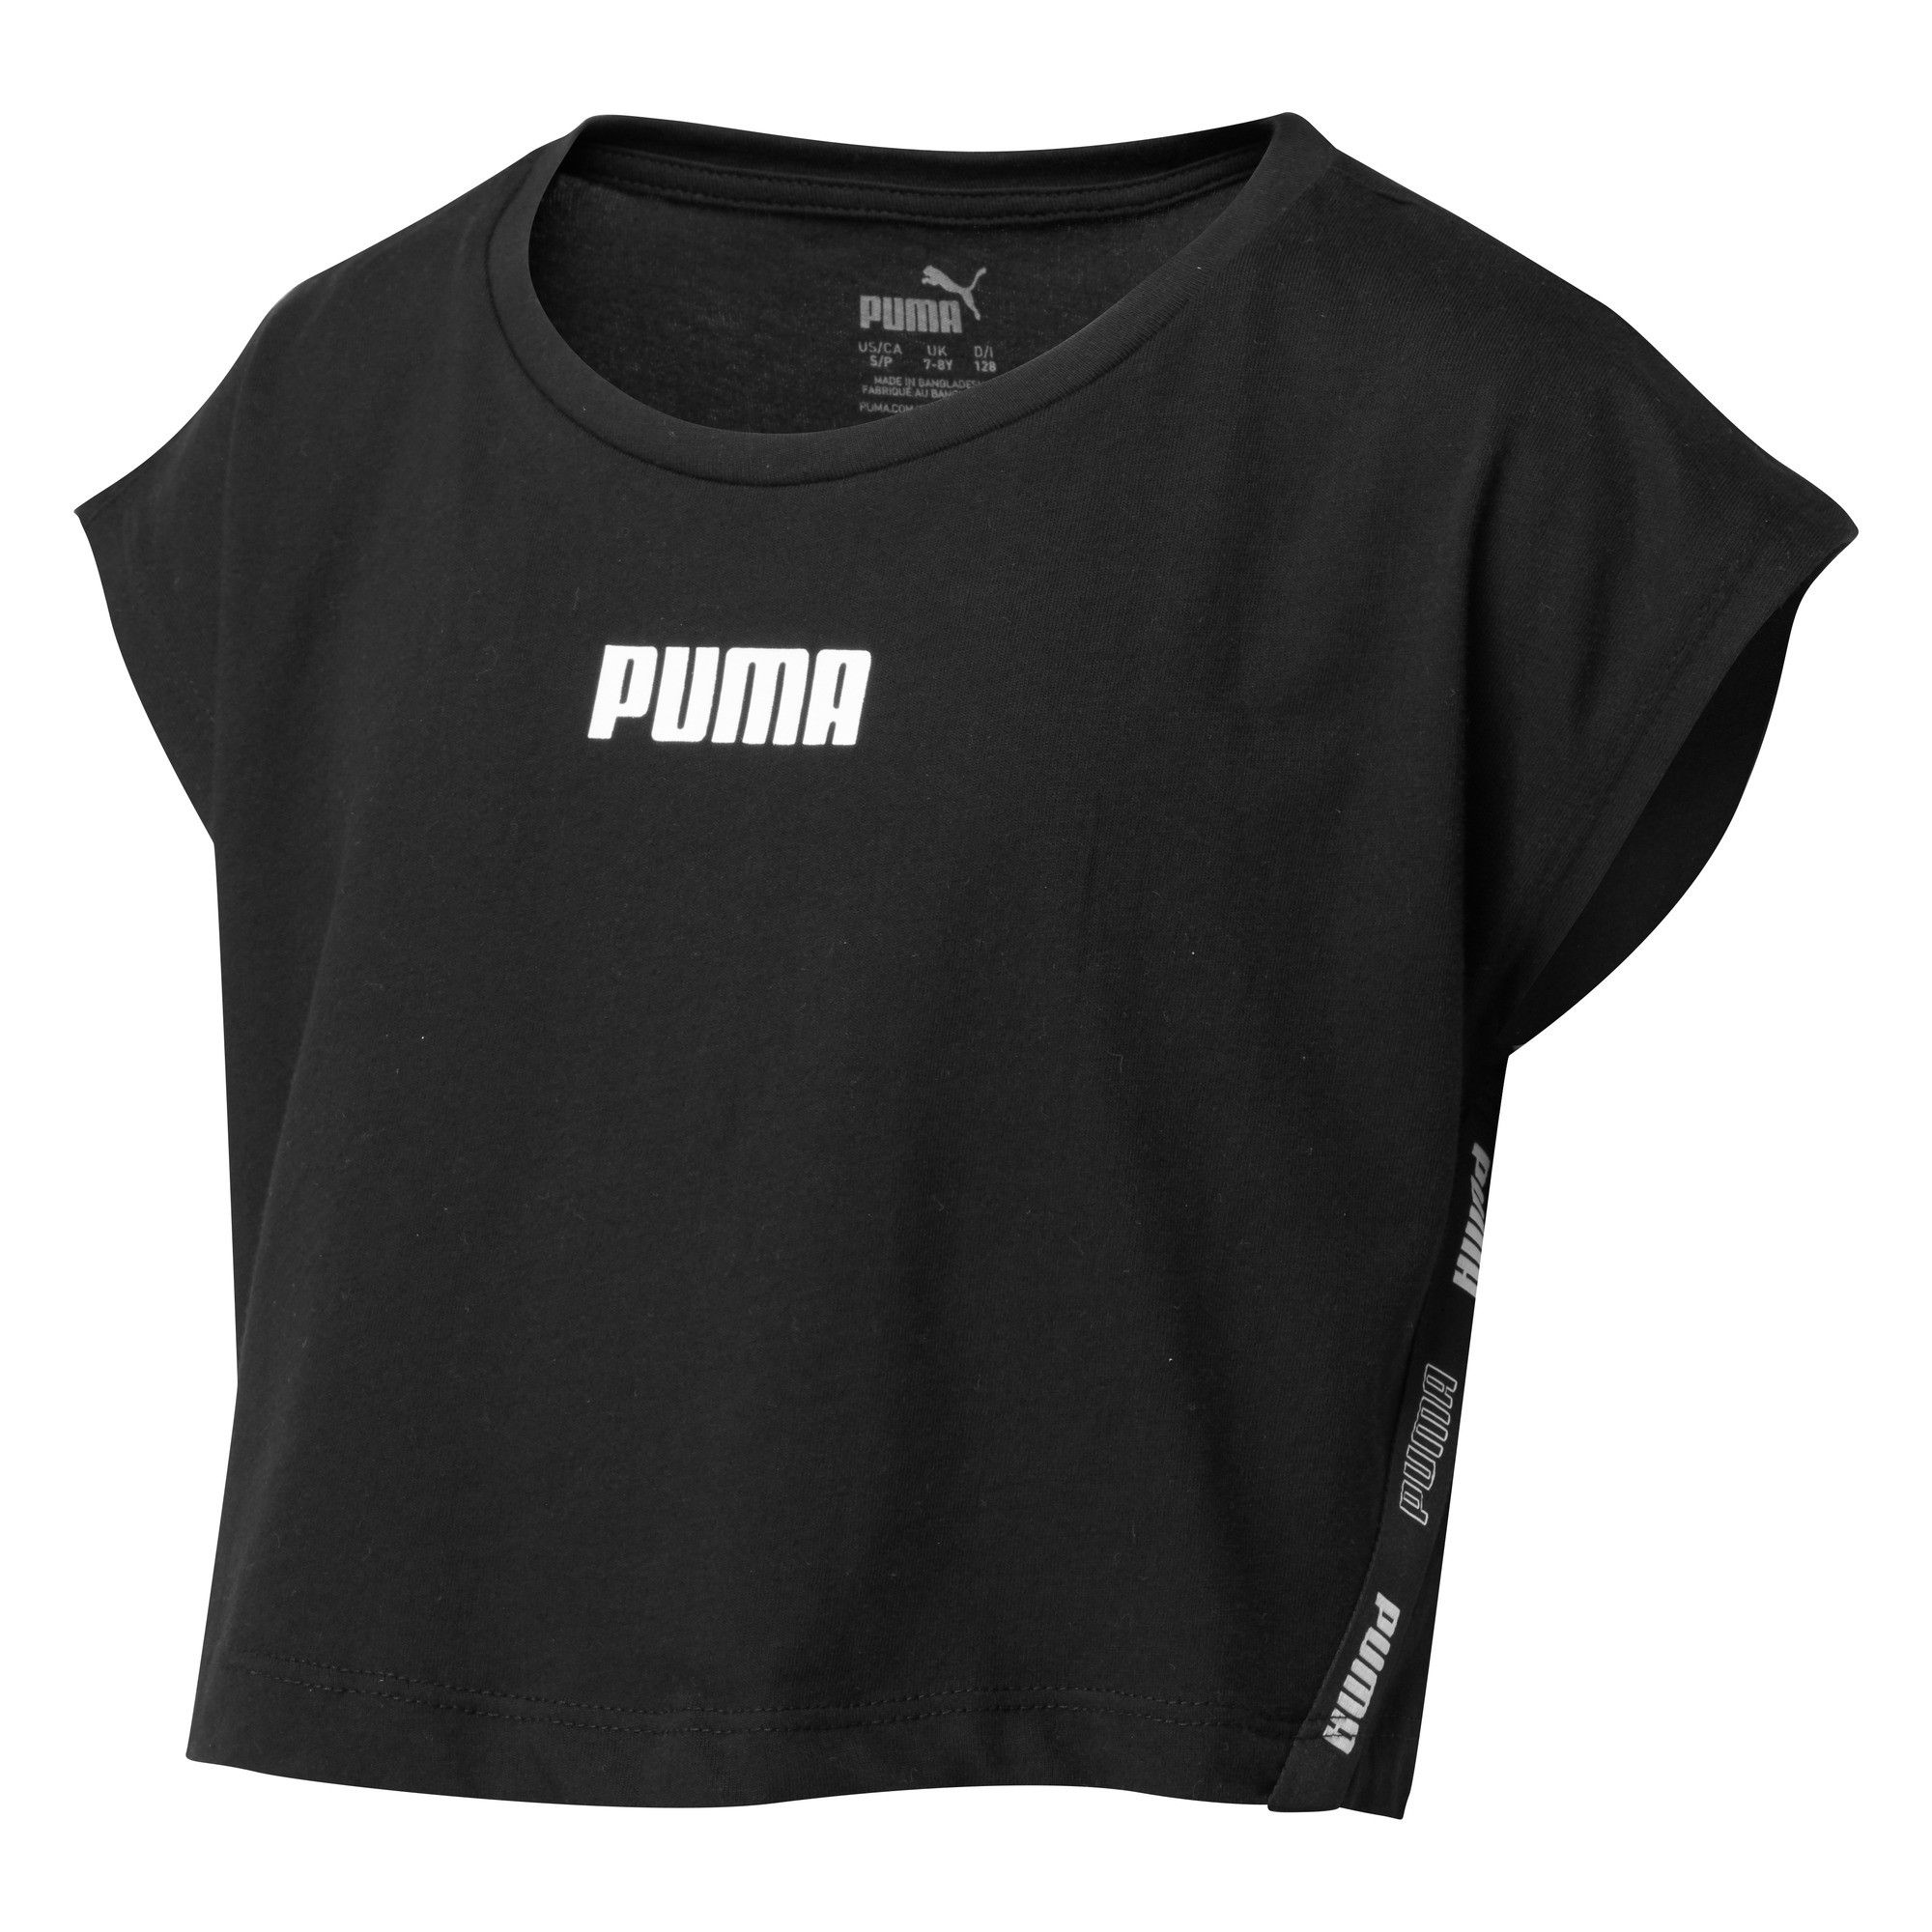 PRODUCT STORY Athletic PUMA DNA meets comfy, casual style. Older kids can throw on the Tape Tee and conquer the day. DETAILS Regular fitCrew neckPUMA branding details